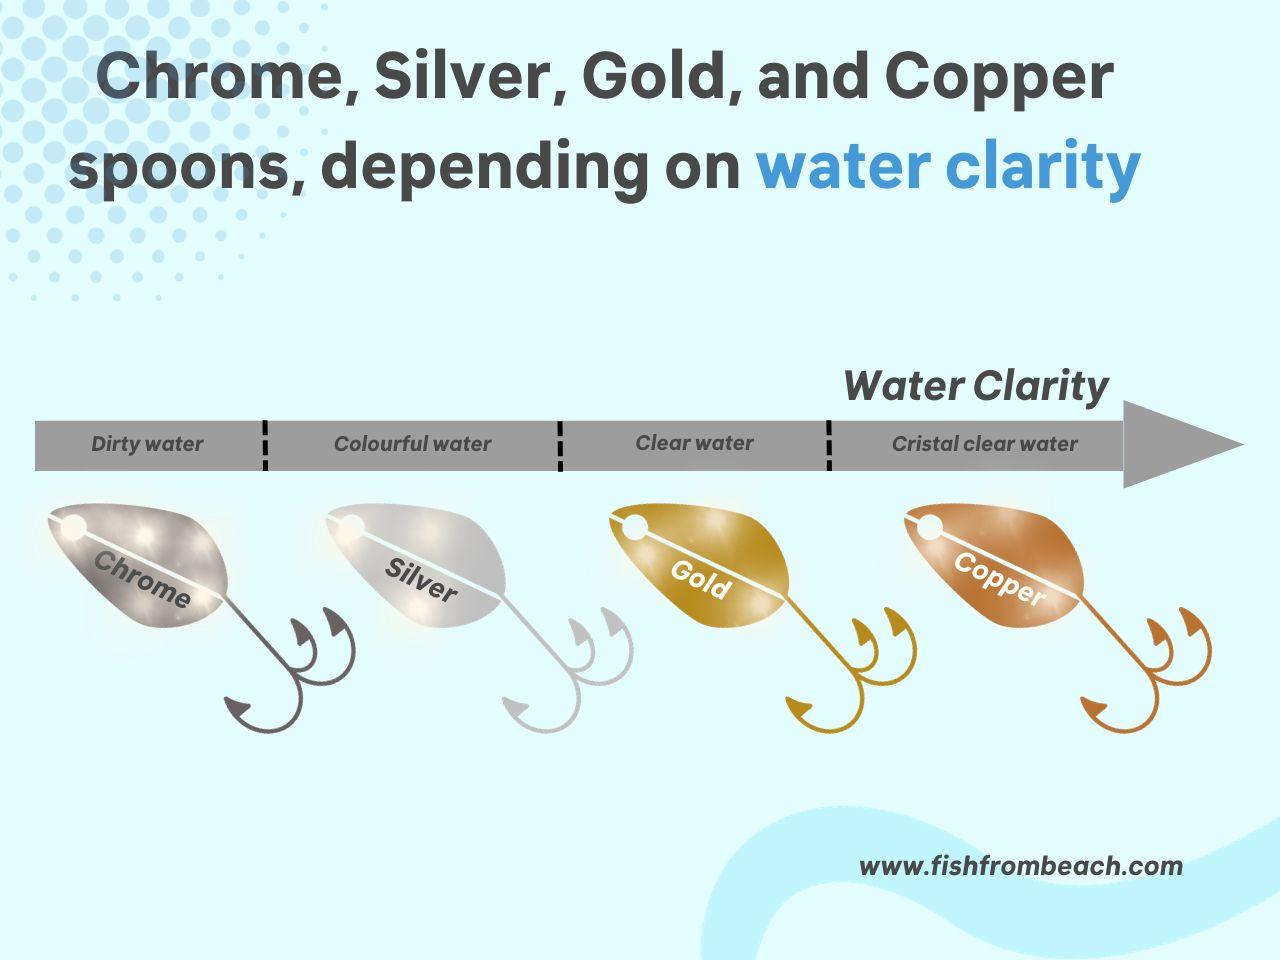 How to choose between gold, silver, chrome, and copper spoons for saltwater fishing?